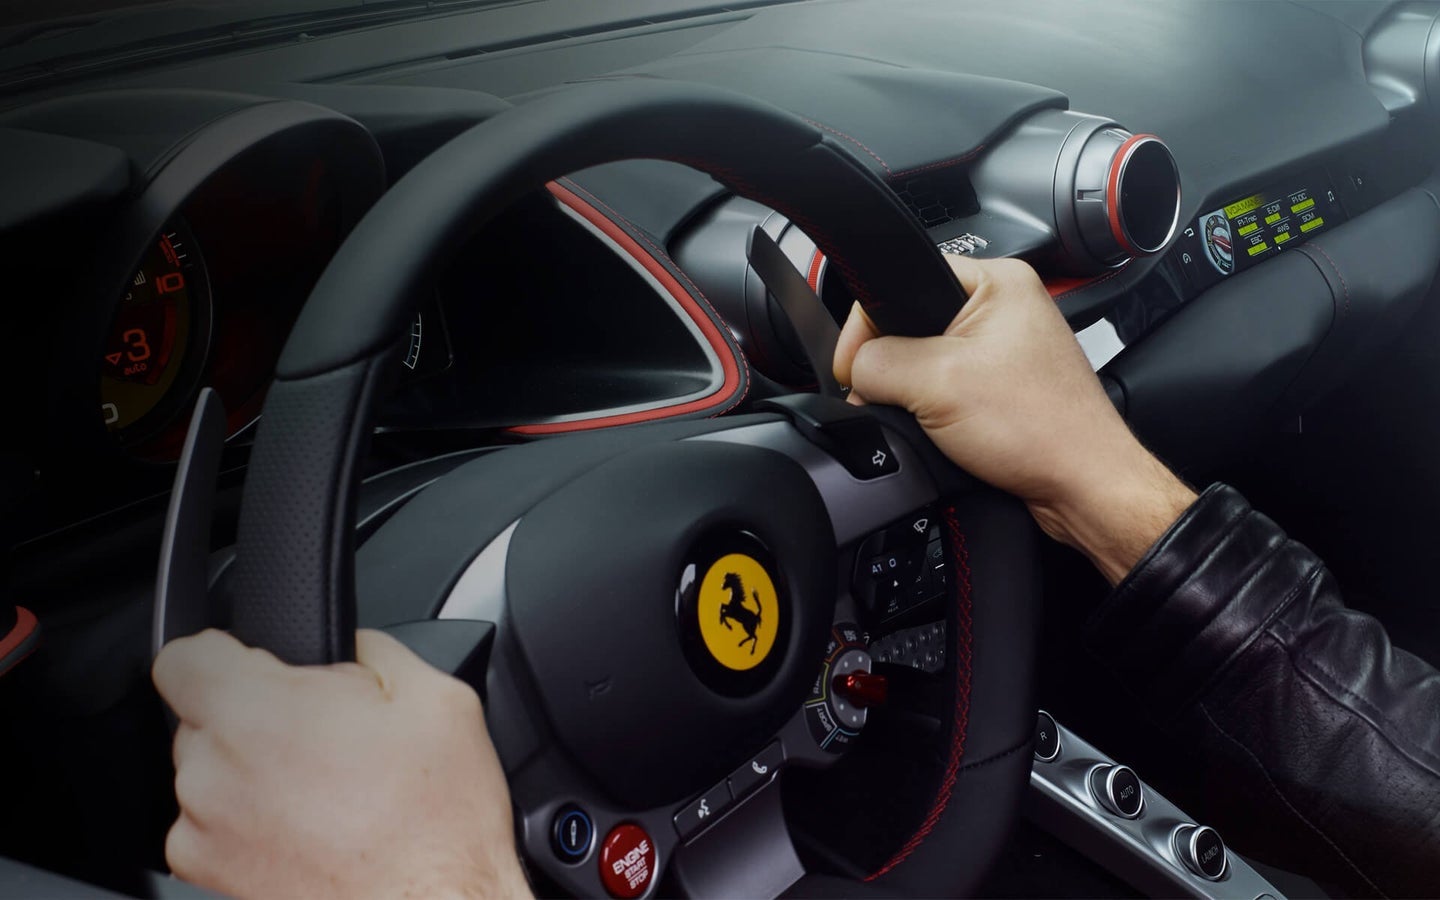 Ferrari supercars of the future might sense whether you are hot or cold, and then change the climate to keep you comfortable, according to a new patent.